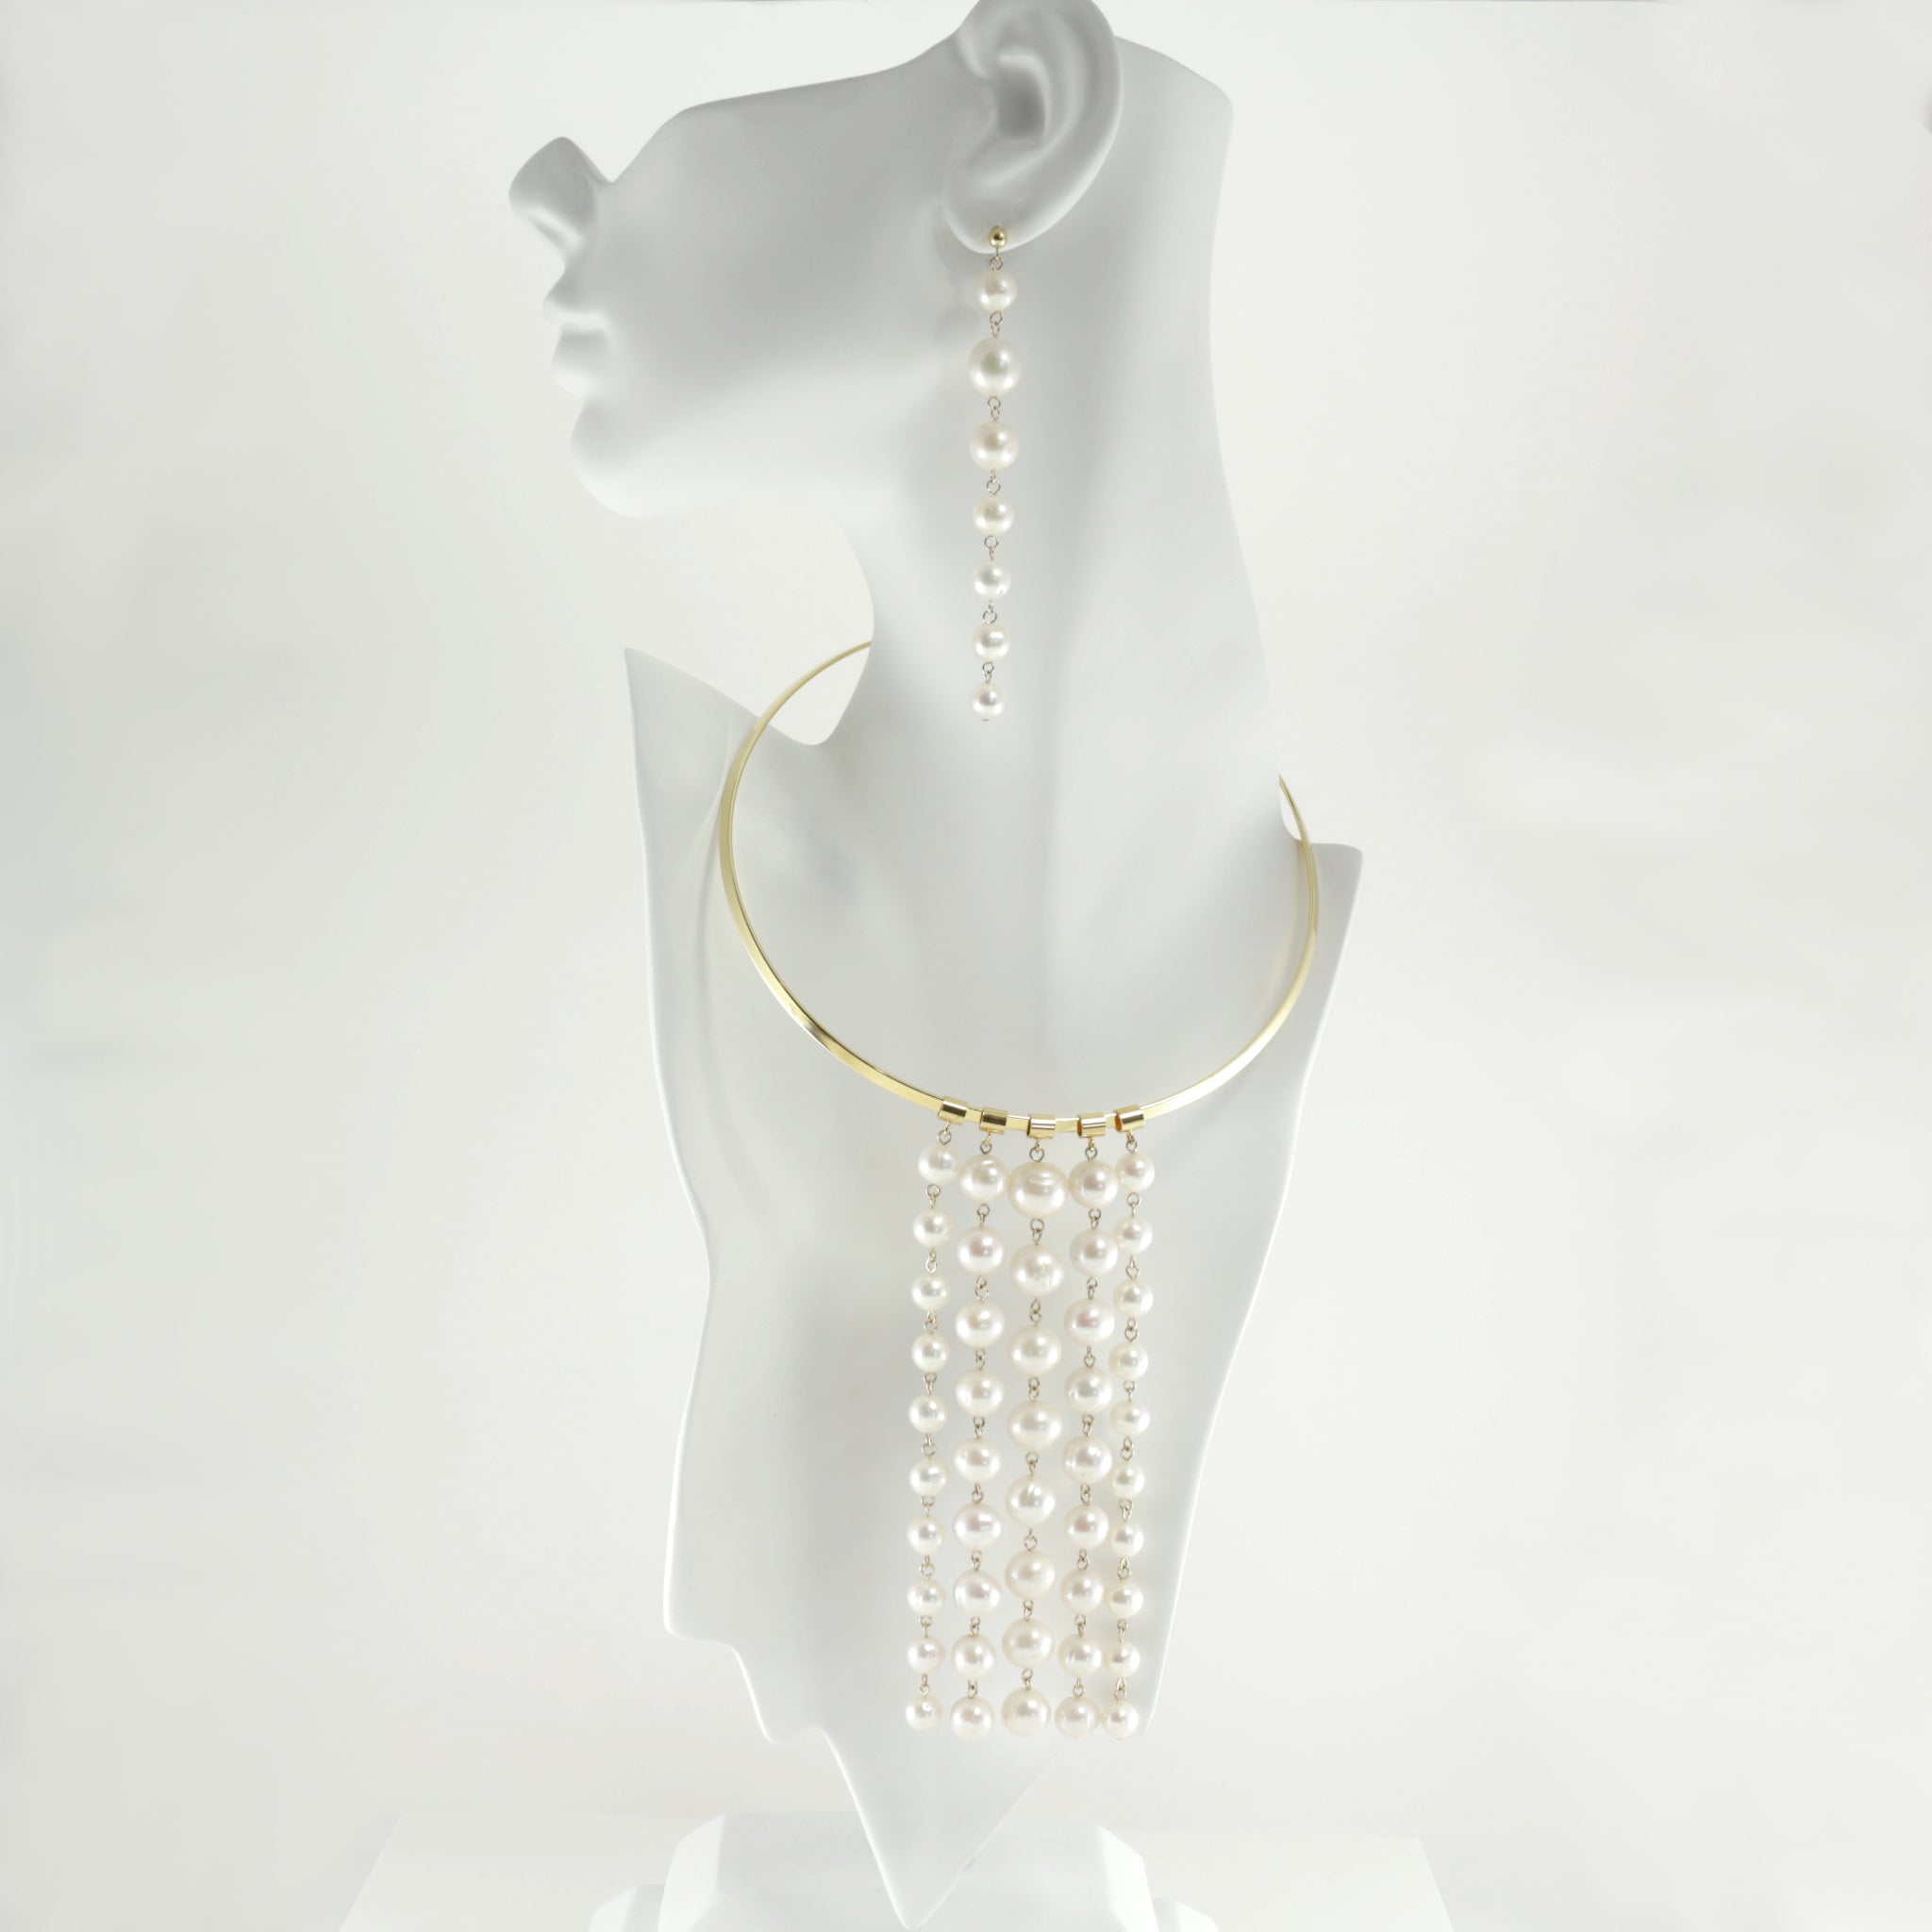 Waterfall Change-ABLE Necklace in White Pearl